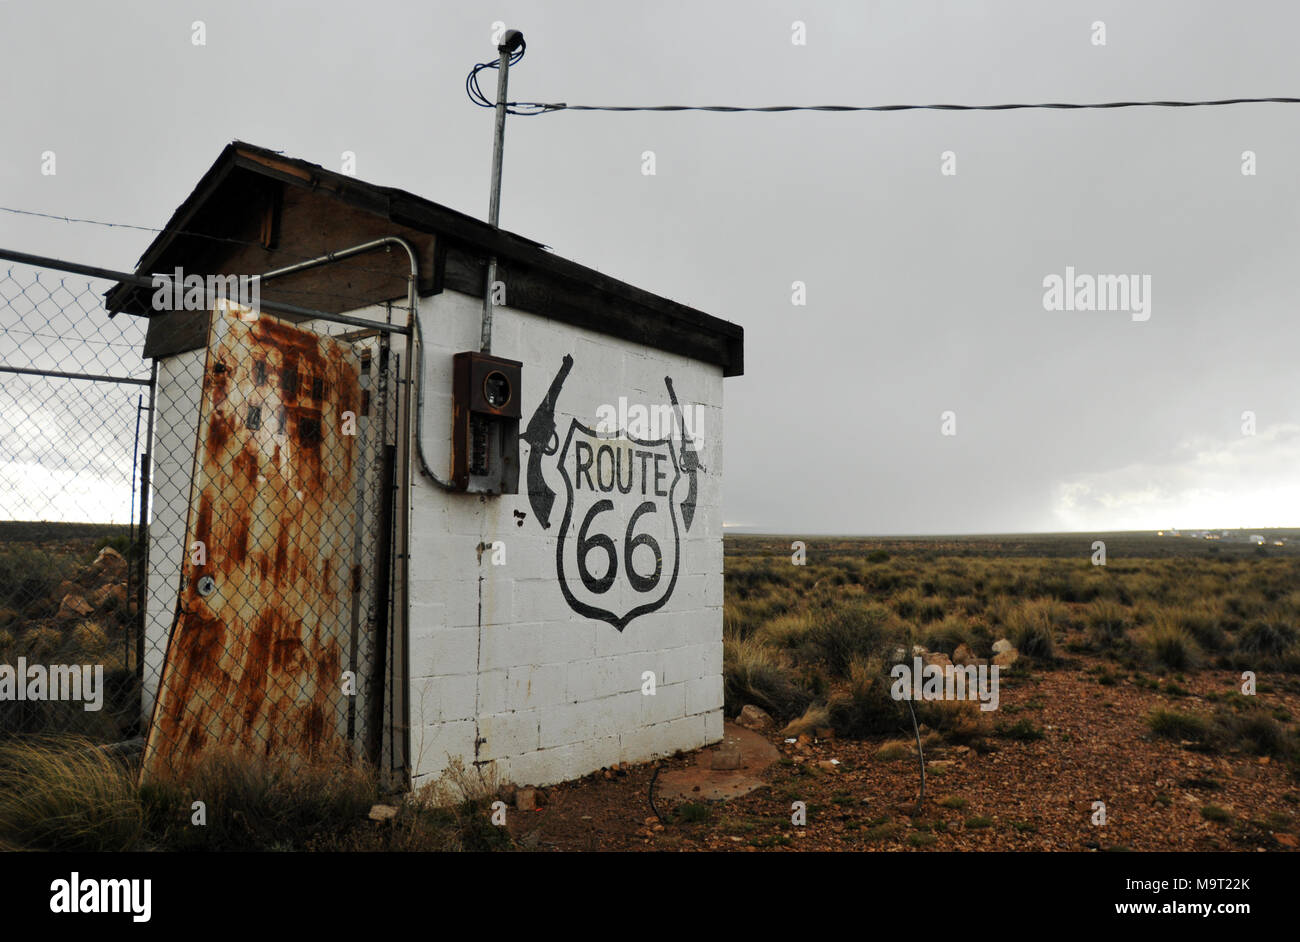 An abandoned shack stands in scrubland at Two Guns, Arizona, once a popular tourist stop along old Route 66. Interstate 40 passes the site today. Stock Photo